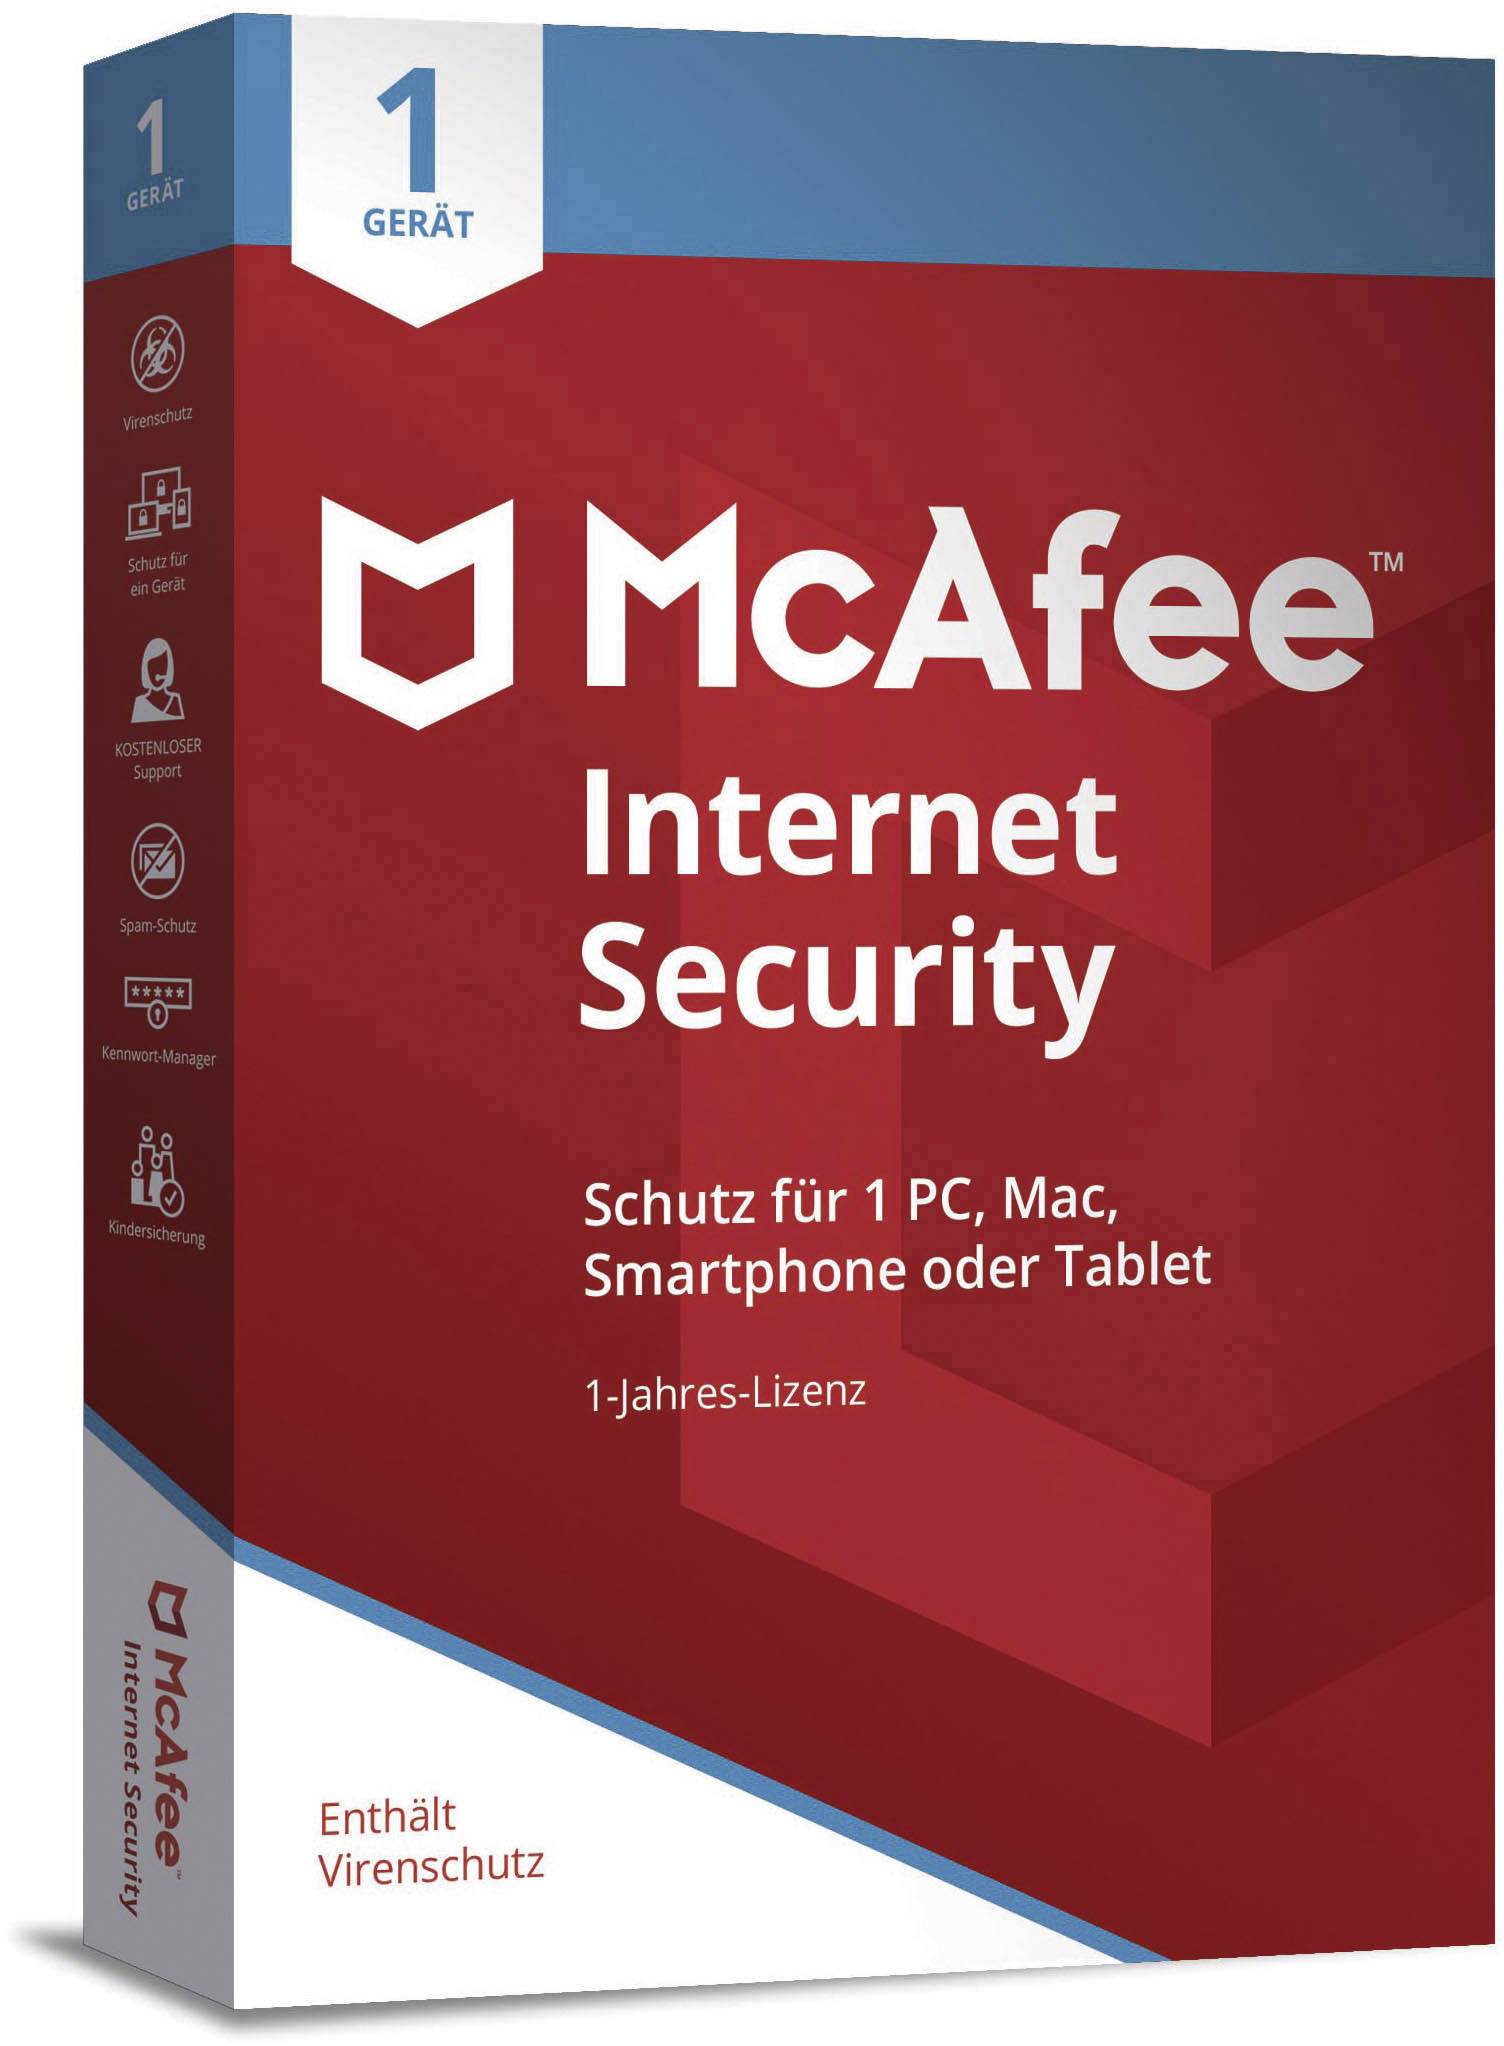 what is mcafee antivirus for mac